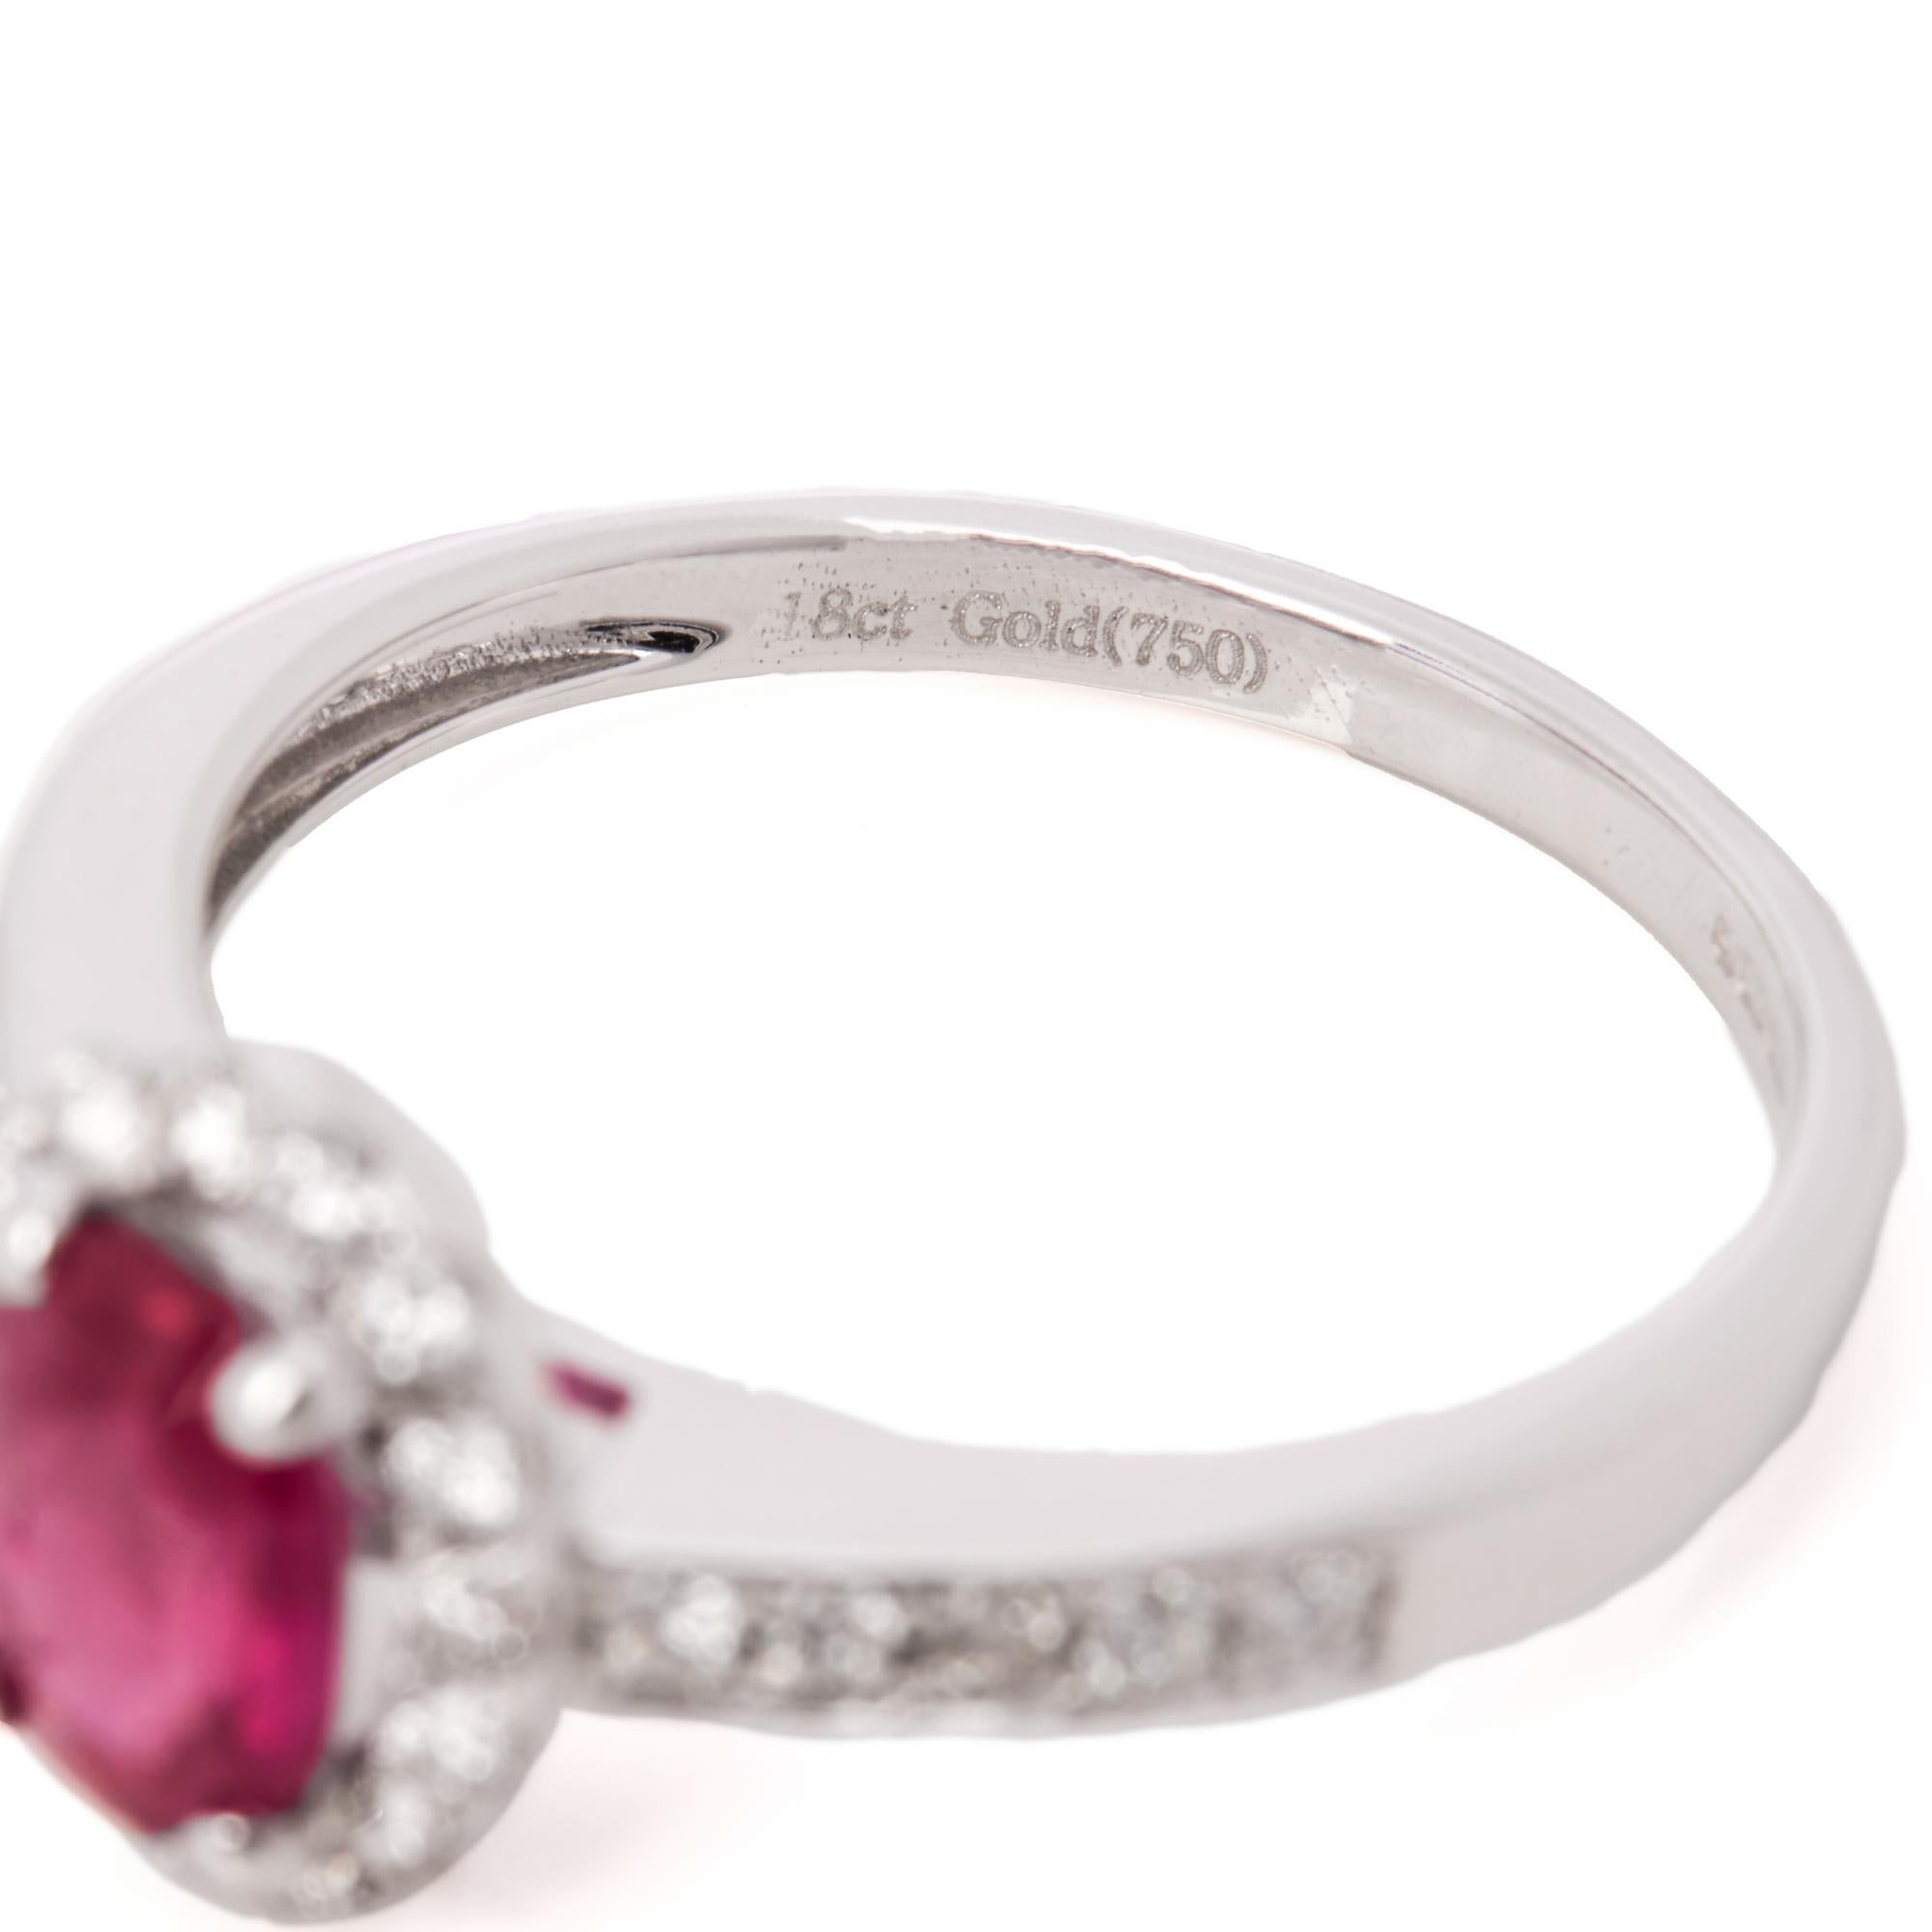 David Jerome Certified 1.17ct Oval Cut Ruby and Diamond Ring In New Condition For Sale In Bishop's Stortford, Hertfordshire